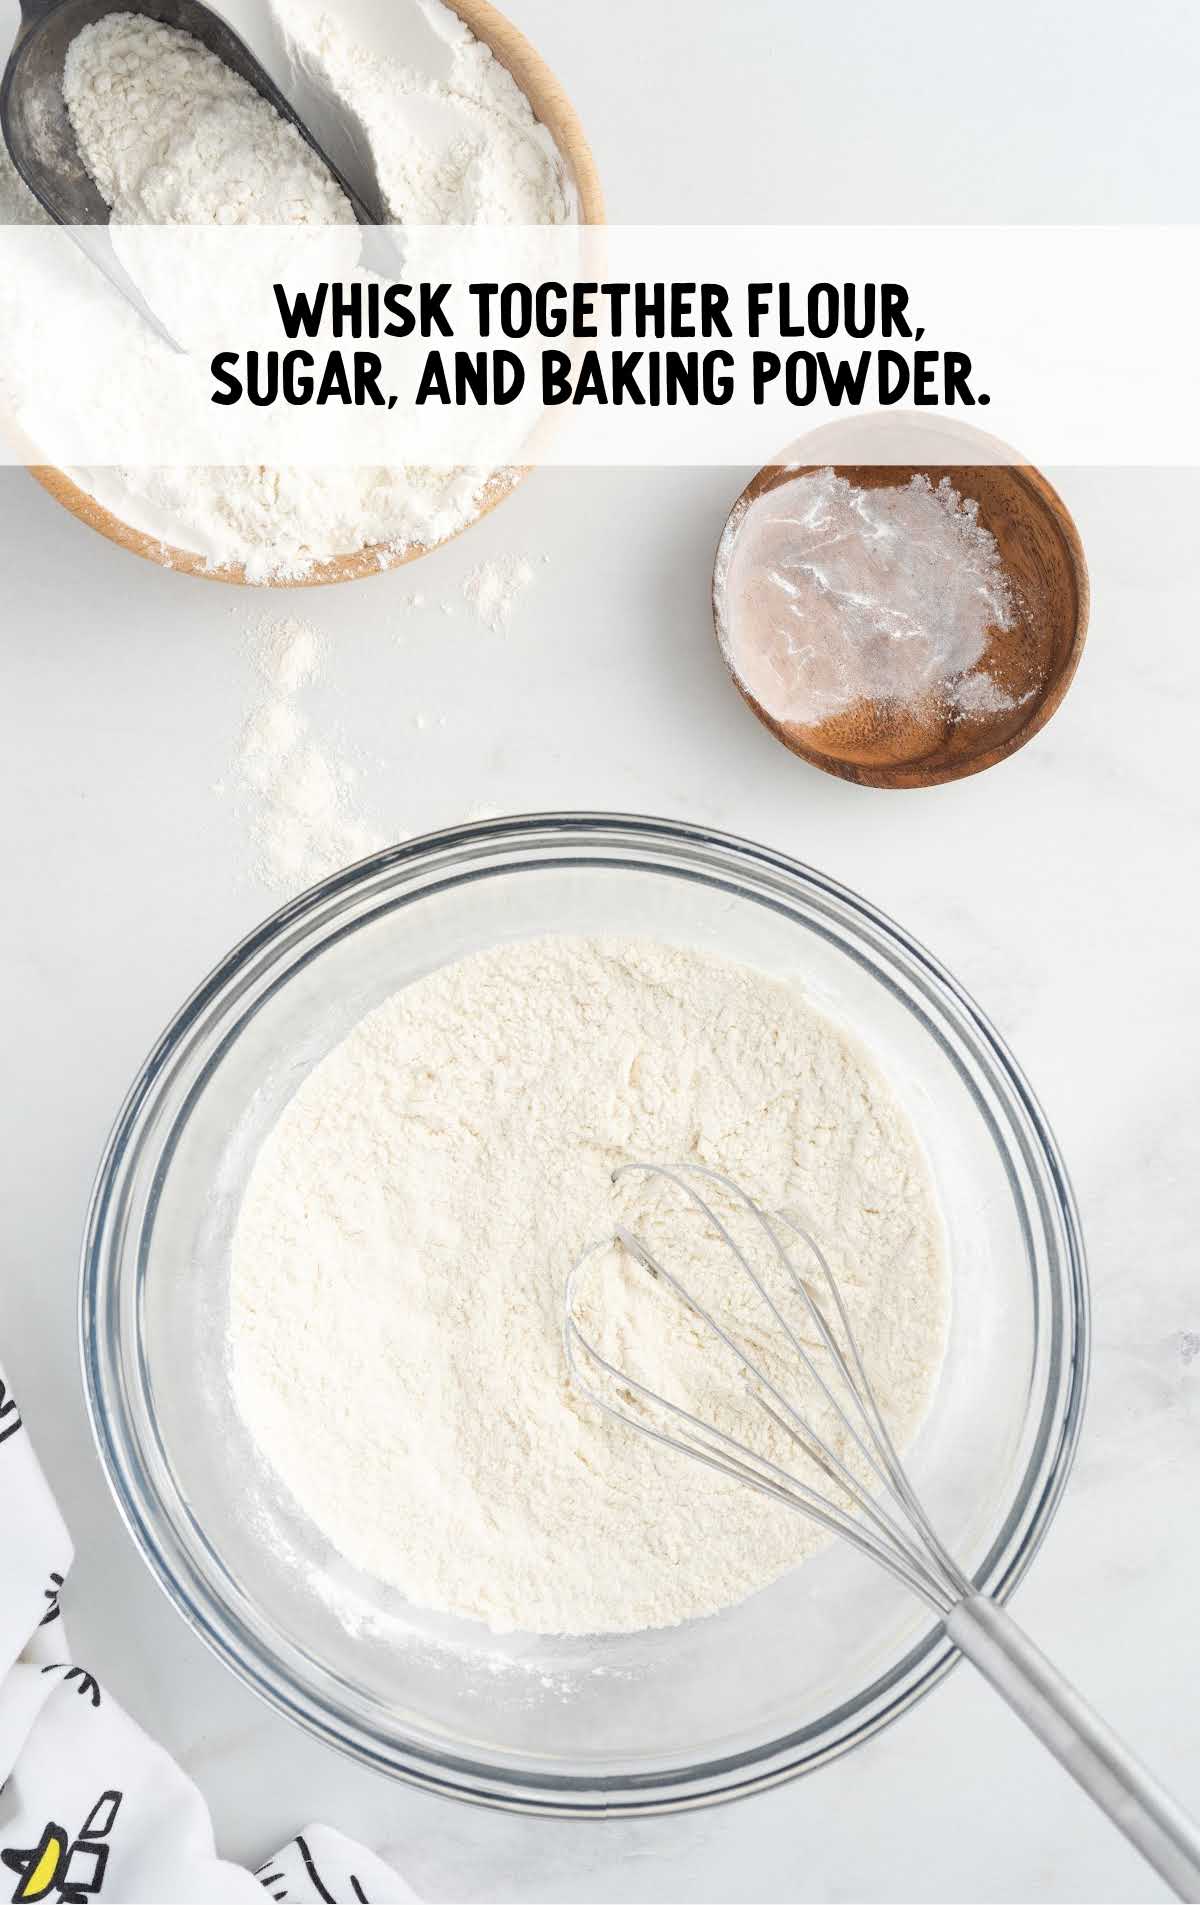 flour, sugar, and baking powder whisked together in a bowl